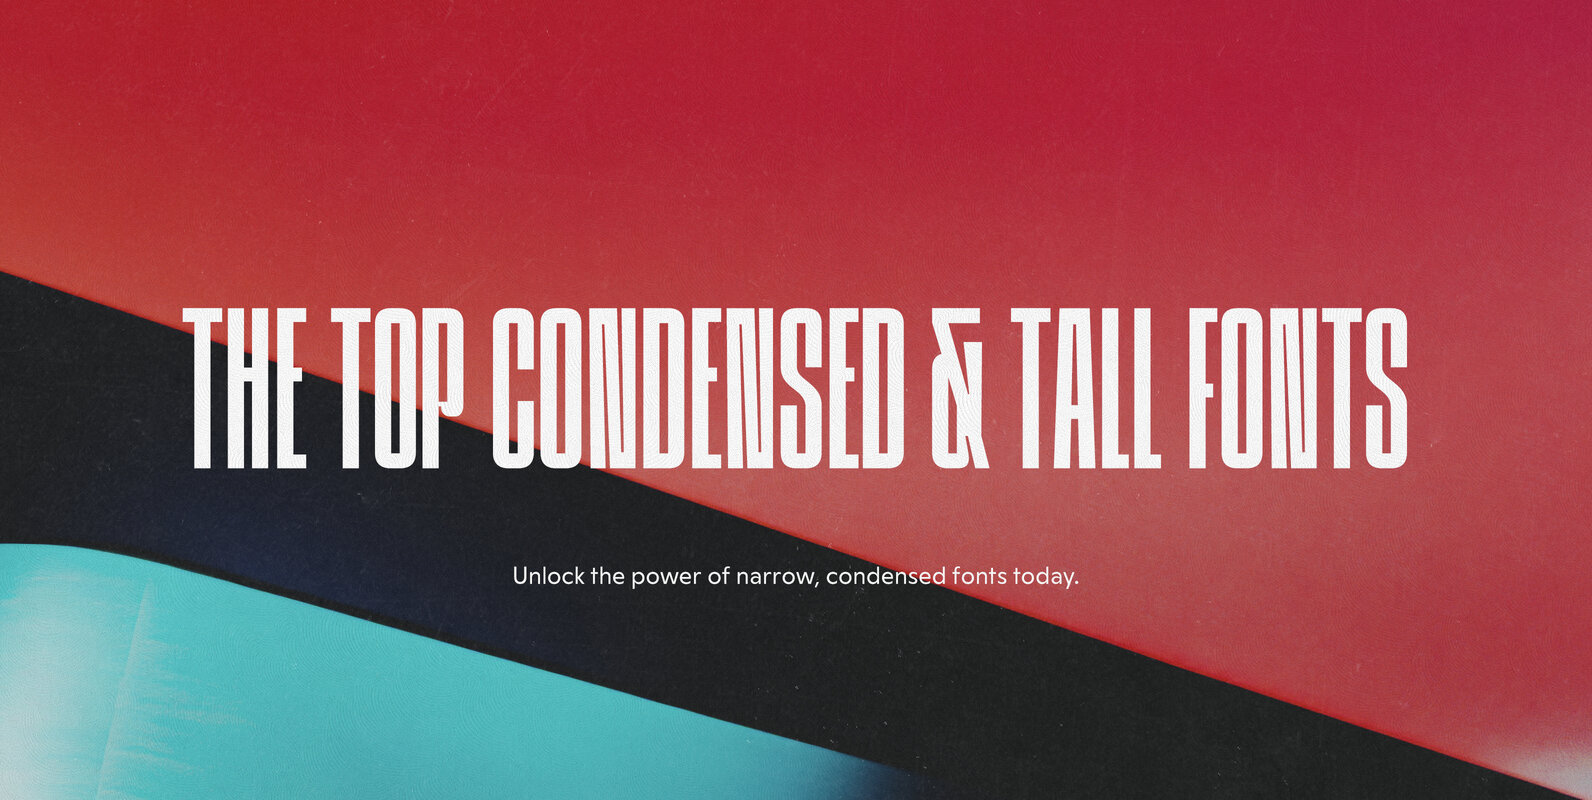 Shop The Top Condensed   Tall Fonts